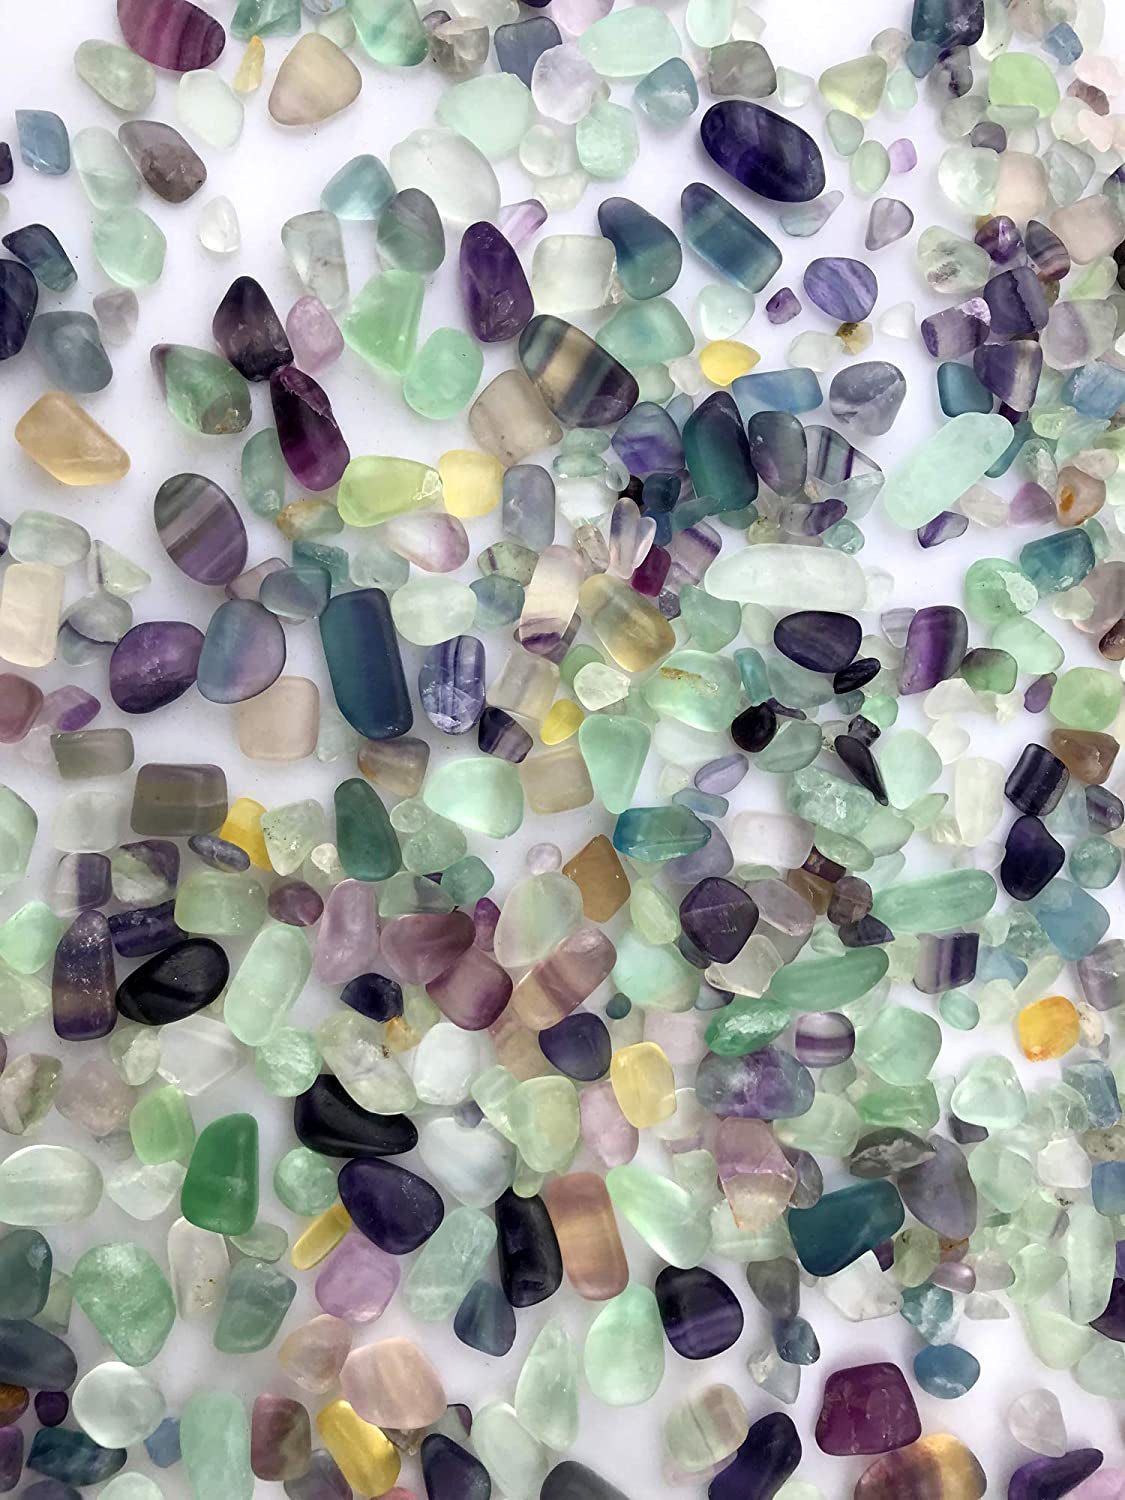 SNAKTOPIA, SNAKTOPIA Fluorite Tumbled Chips Stone Crushed Crystal Natural Quartz Pieces Irregular Shaped Stones about 0.2~0.5In Weight 0.74 Ib (1 - Fluorite)